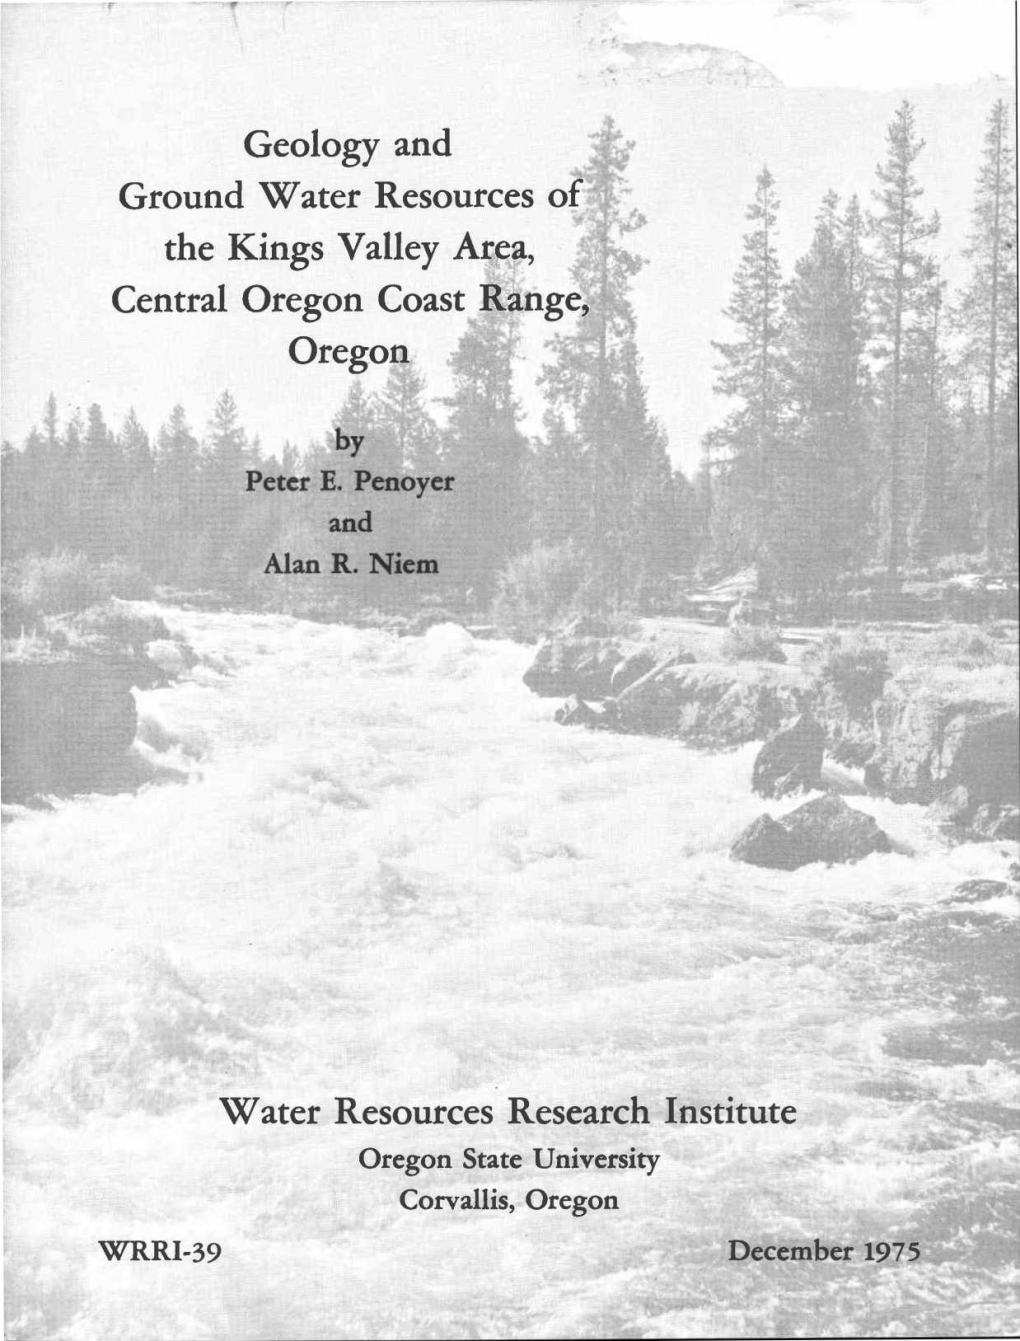 Geology and Ground Water Resources of the Kings Valley Area, Central Oregon Coast Range Oregon